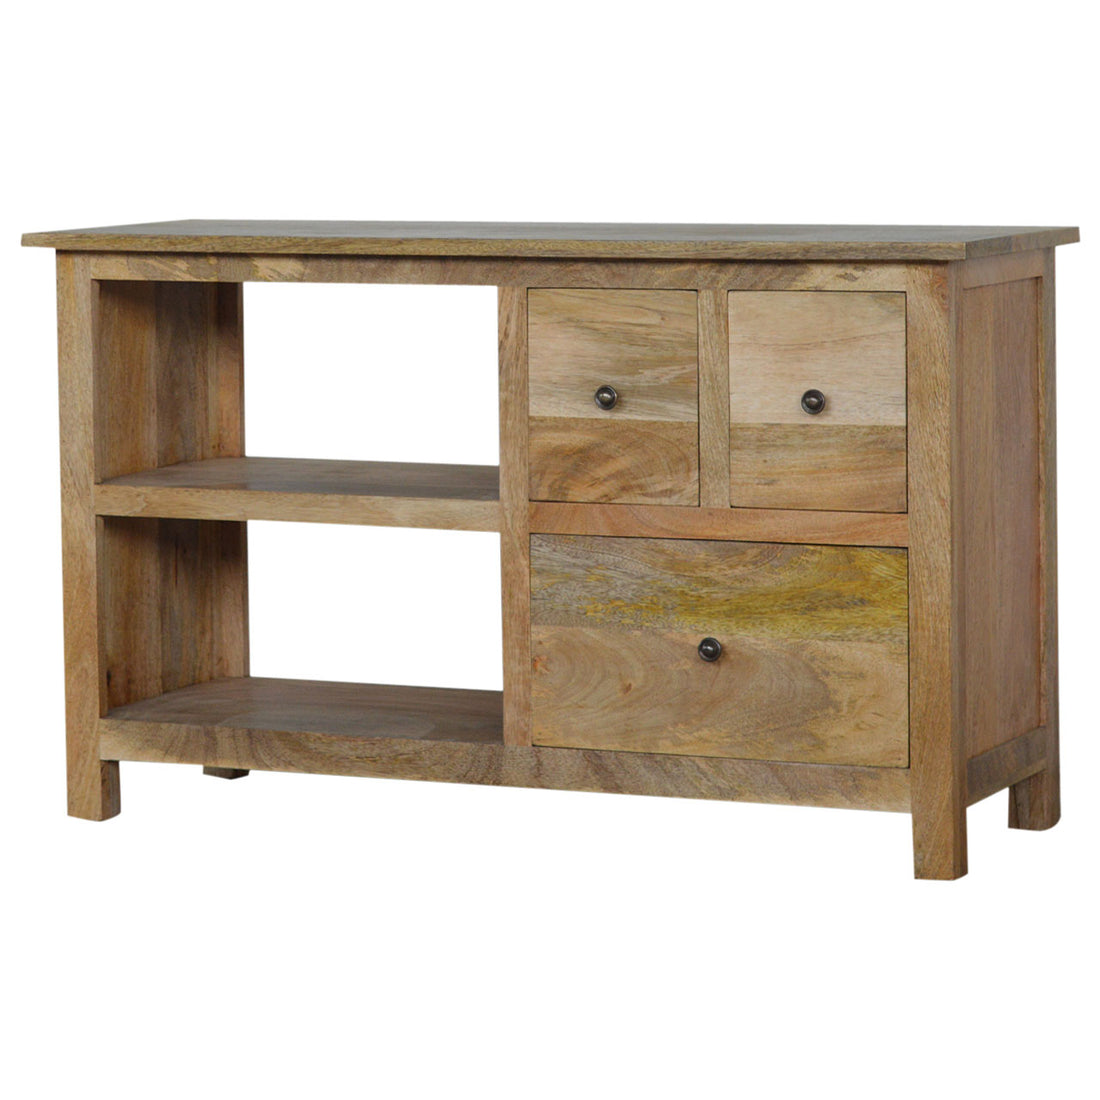 3 Drawer Country Media Unit